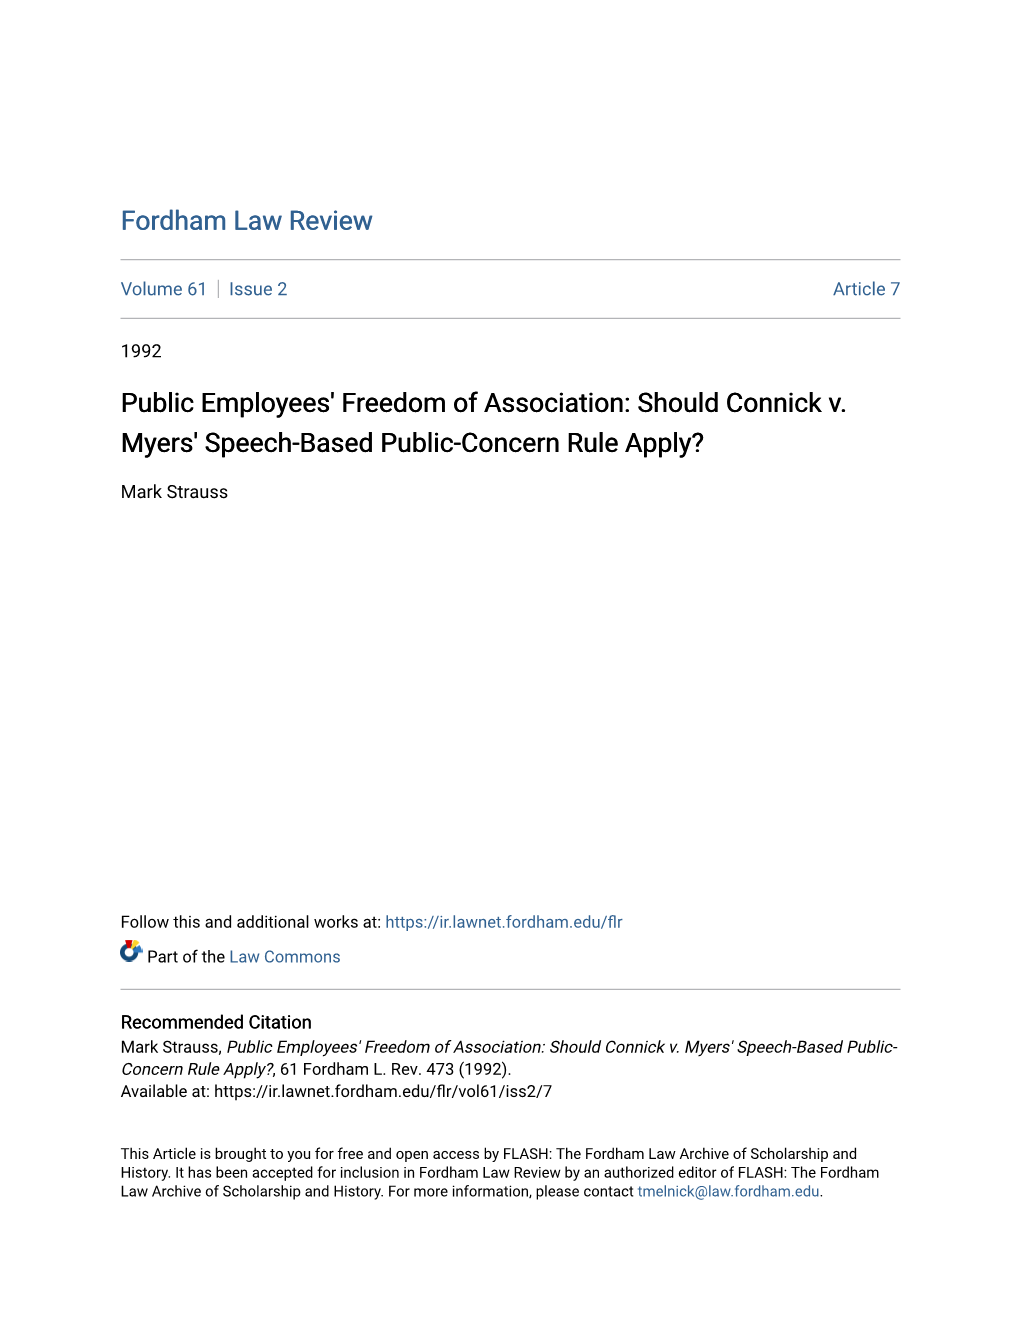 Public Employees' Freedom of Association: Should Connick V